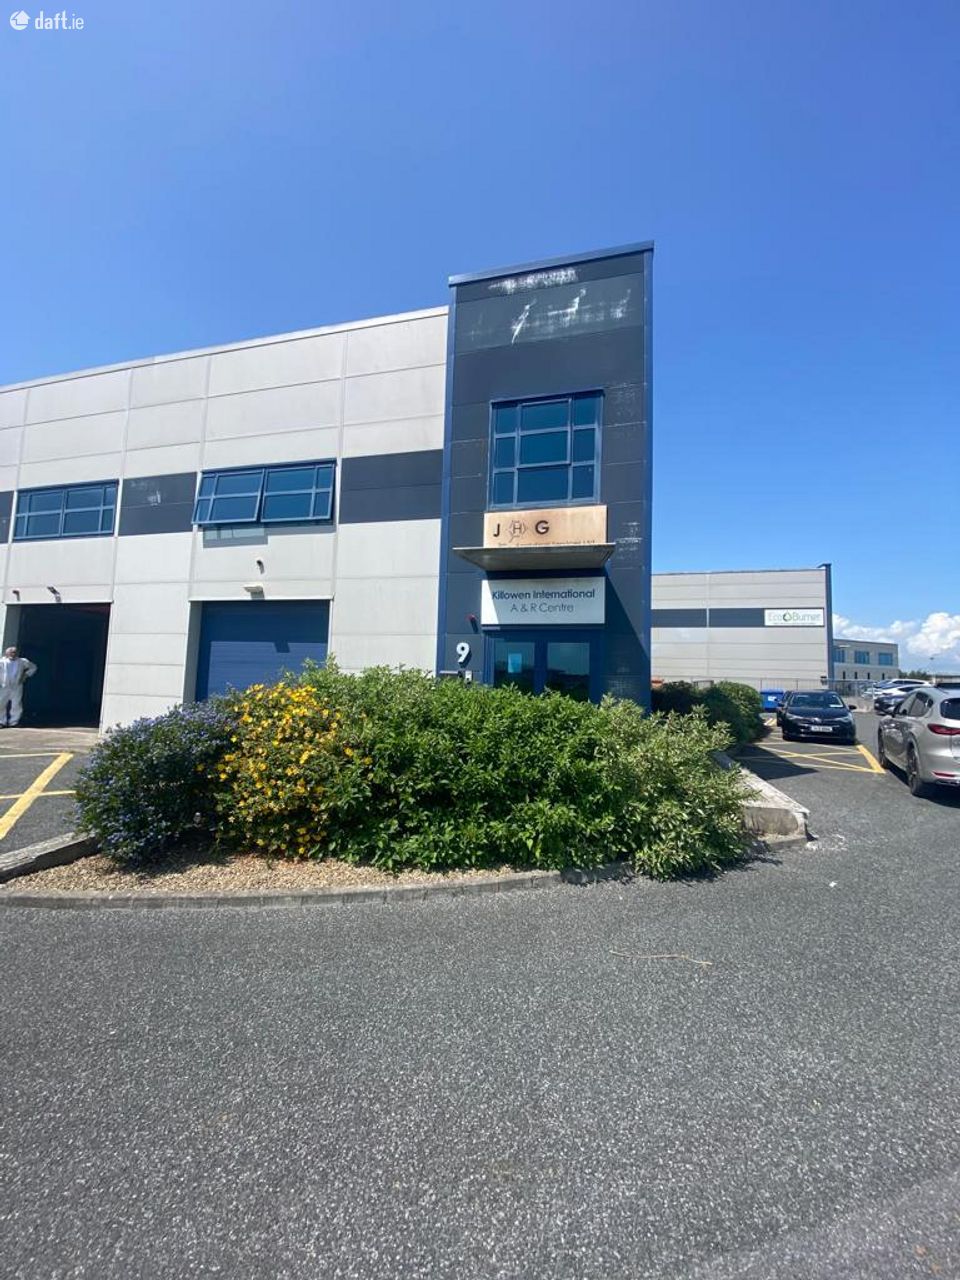 Unit 9, Airside Boeing Avenue, Airport Business Park, Killowen, Co. Waterford